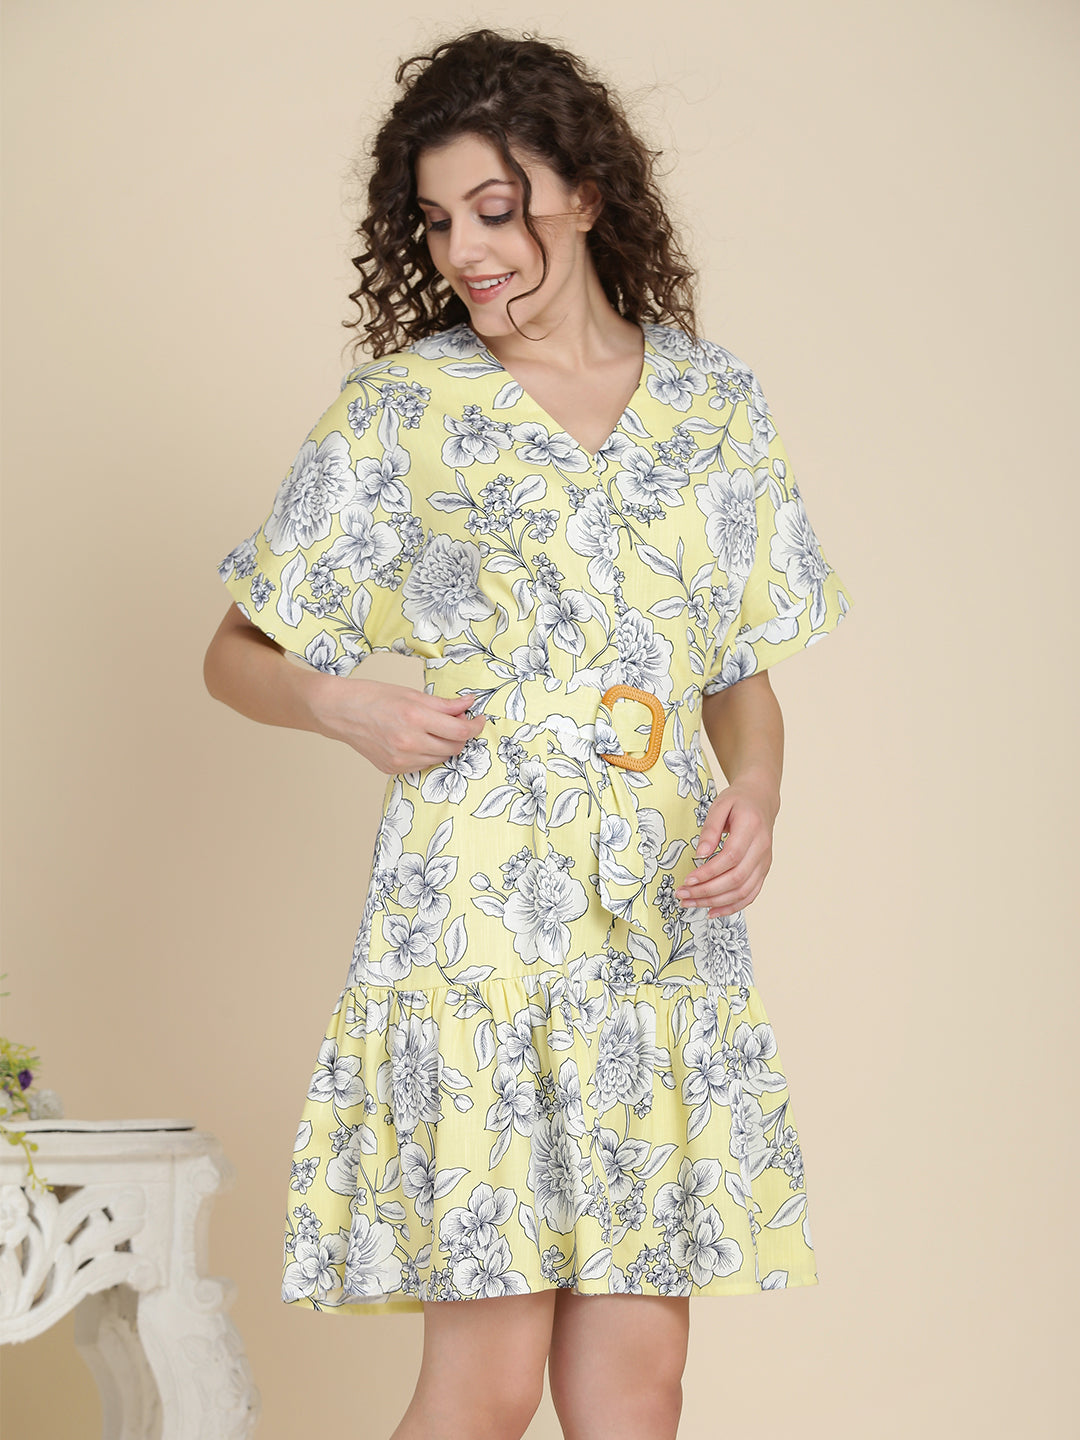 Bohobi Women Yellow Floral Print Dress with Belt  Color: Yellow Fabric: Cotton Lining: Cotton Lining Pattern: Floral Print Fit: Comfort Fit Length: Above Knee Length Detail: Waist Belt Neck: V Neck Care: Gentle Machine Wash